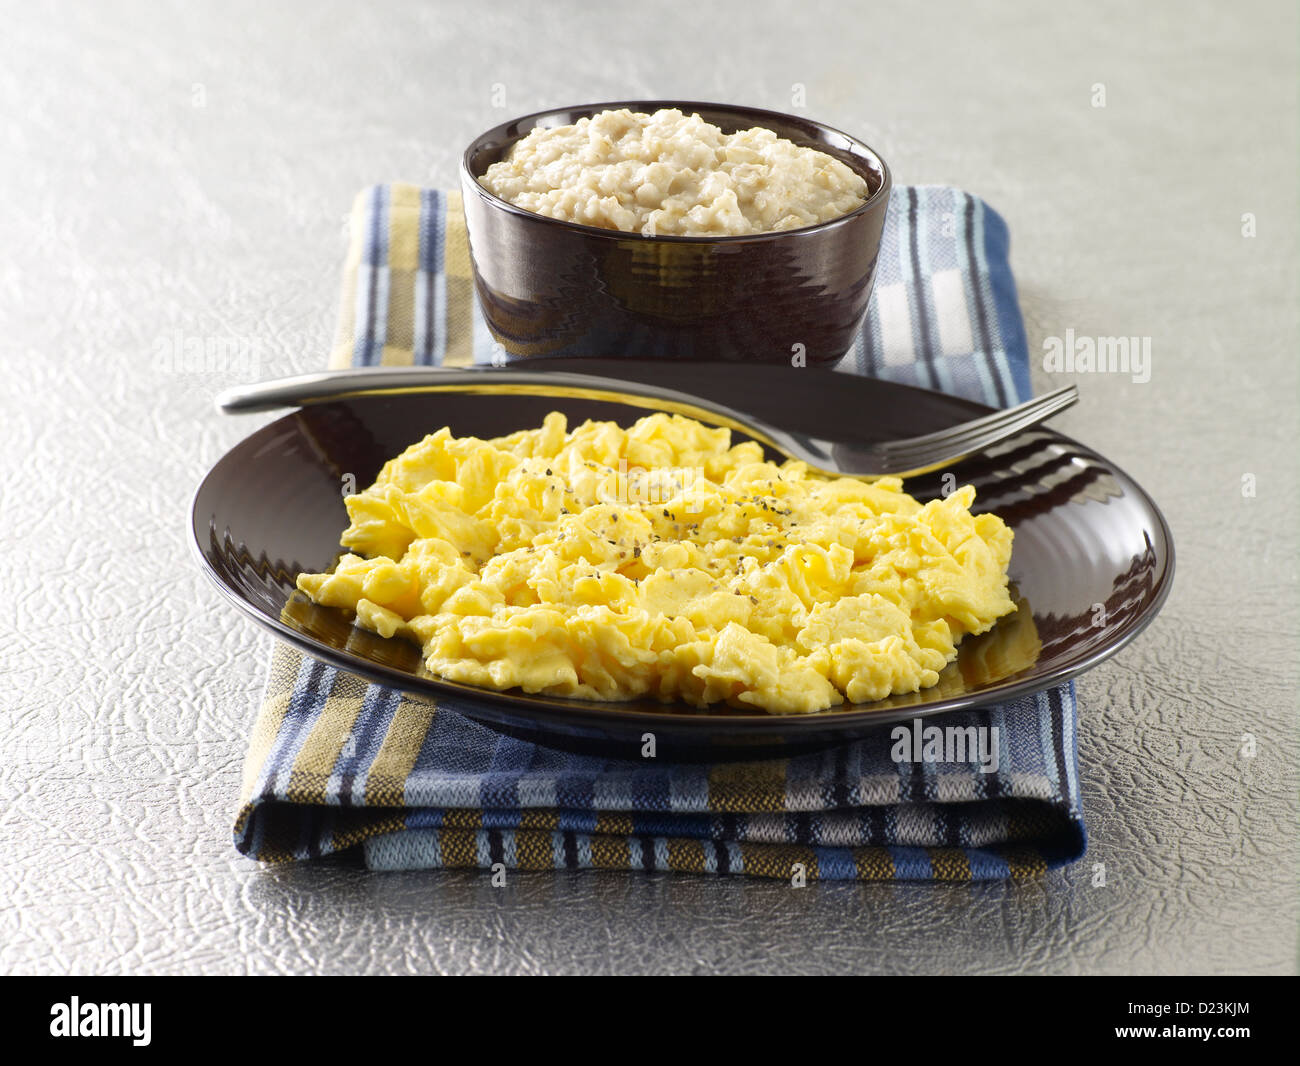 Scrambled eggs - Free food and restaurant icons